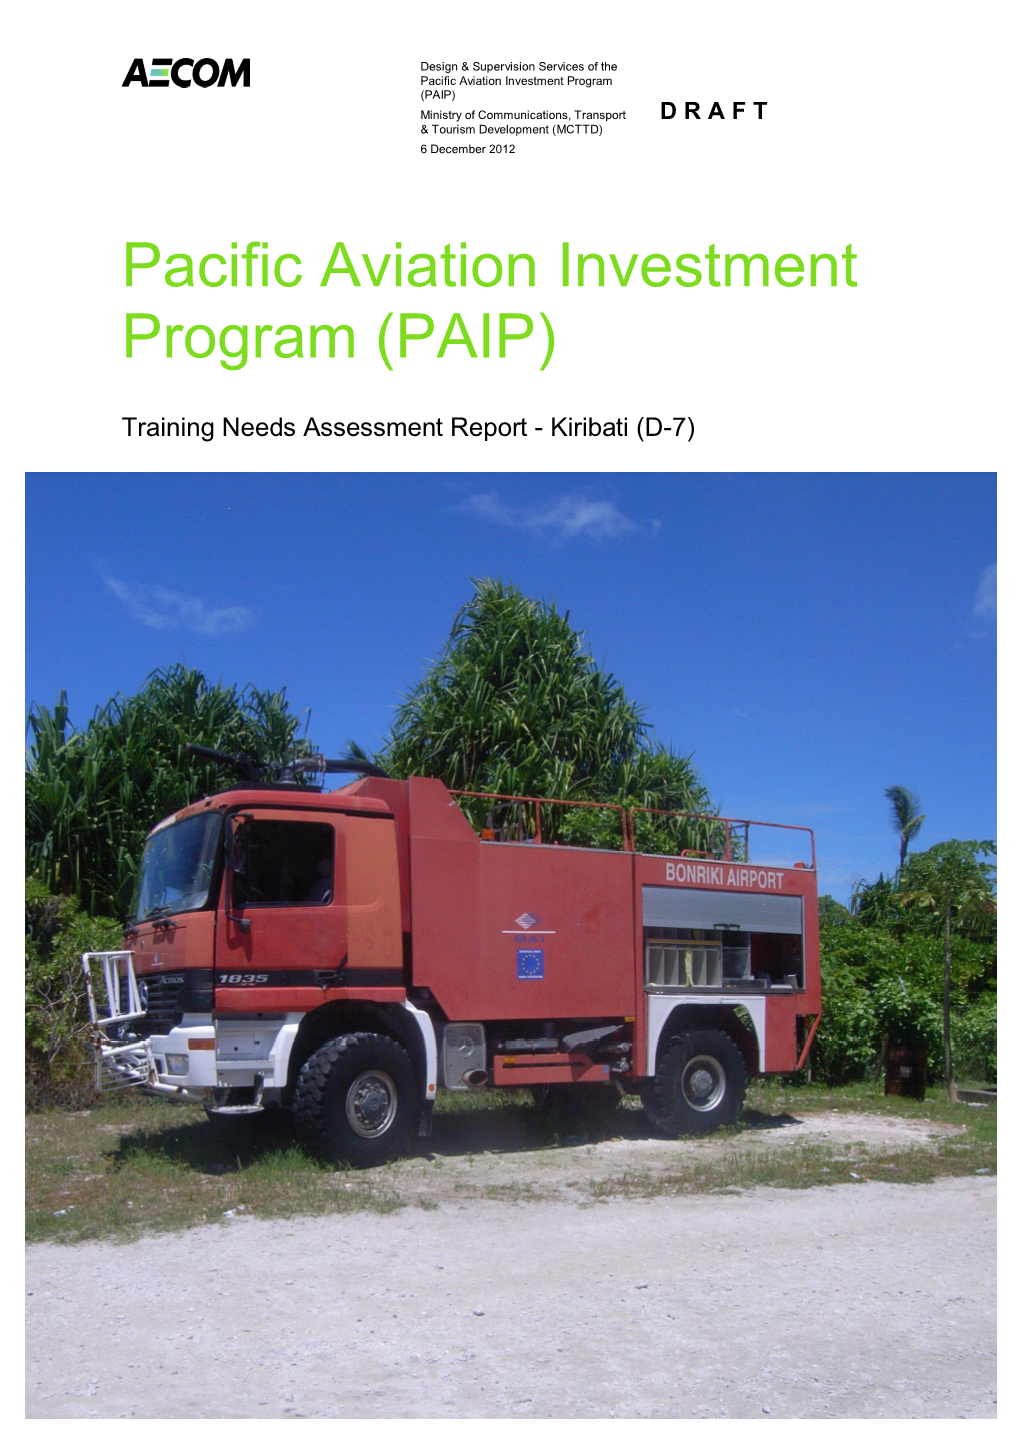 Pacific Aviation Investment Program (PAIP) Ministry of Communications, Transport D R a F T & Tourism Development (MCTTD) 6 December 2012